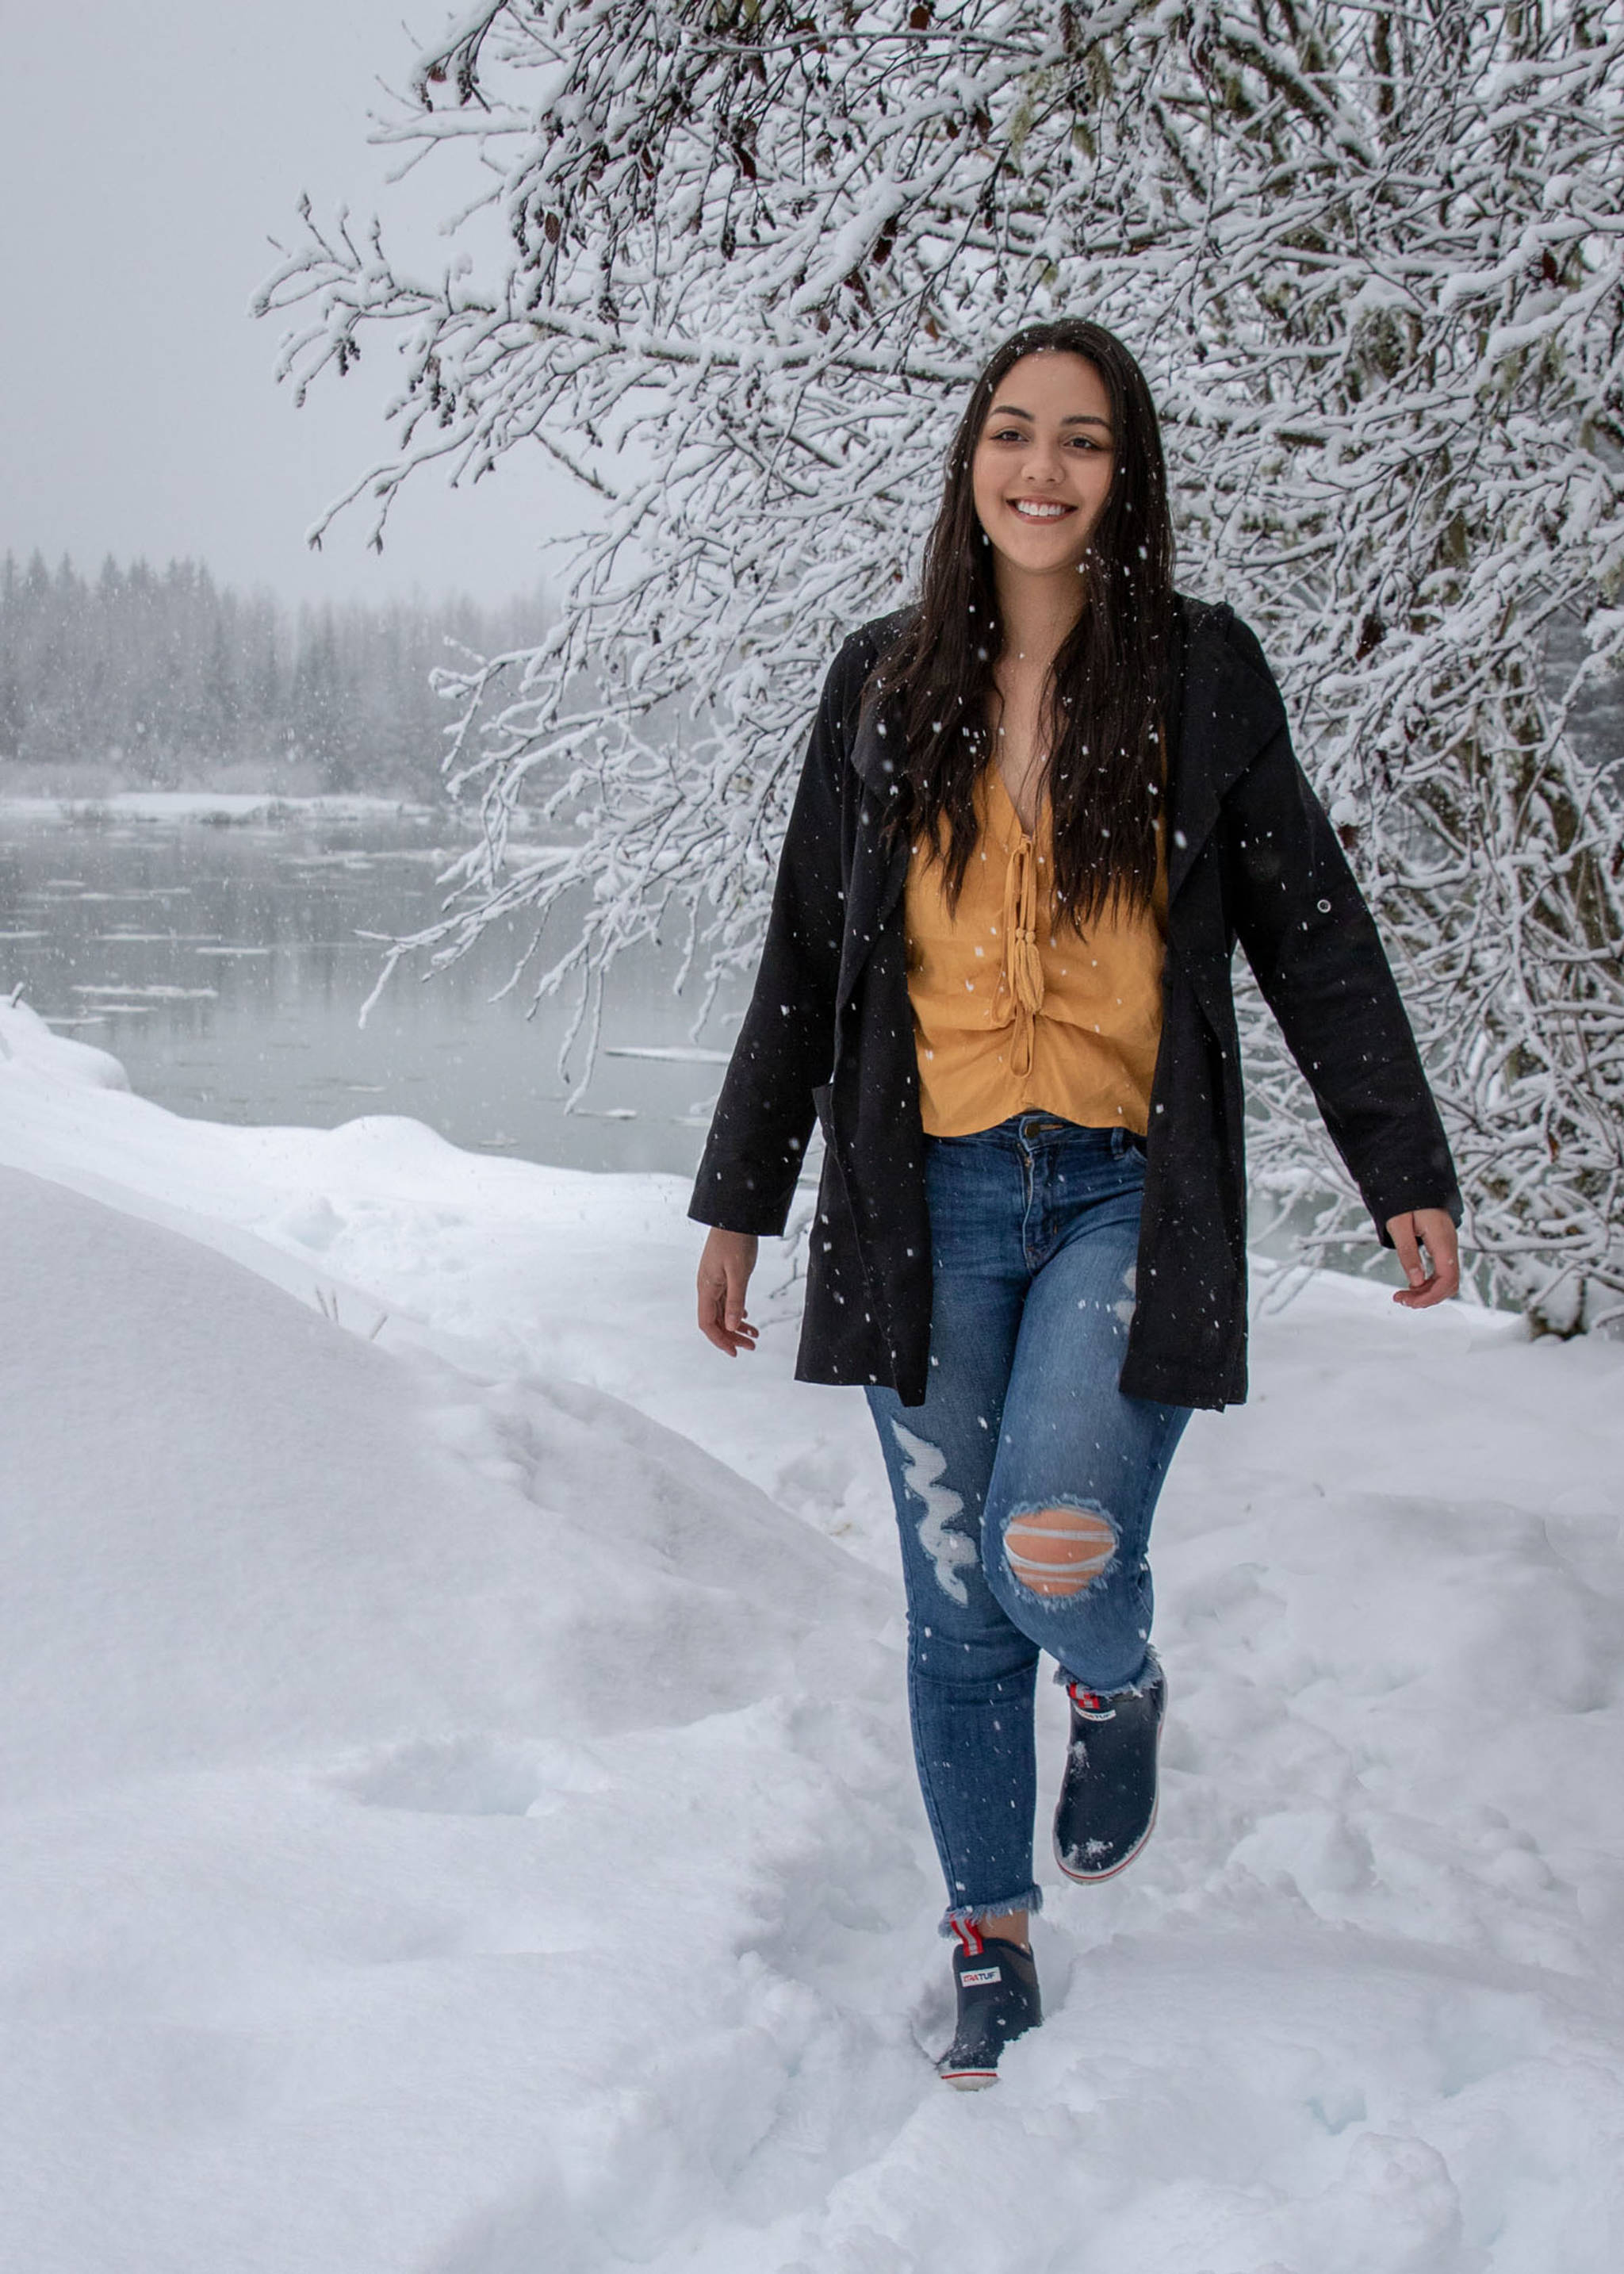 Jan. 27, 2019: On a snowy morning near the Mendenhall River, Taylor Baker was a definite bright spot. Her gold blouse from H&M, distressed jeans from Apricot Lane and black trench coat from Be Cool LA really stood out against the otherwise white landscape. I also loved the navy low-cut Xtratufs that she borrowed from her boyfriend Andy — practical and attractive!